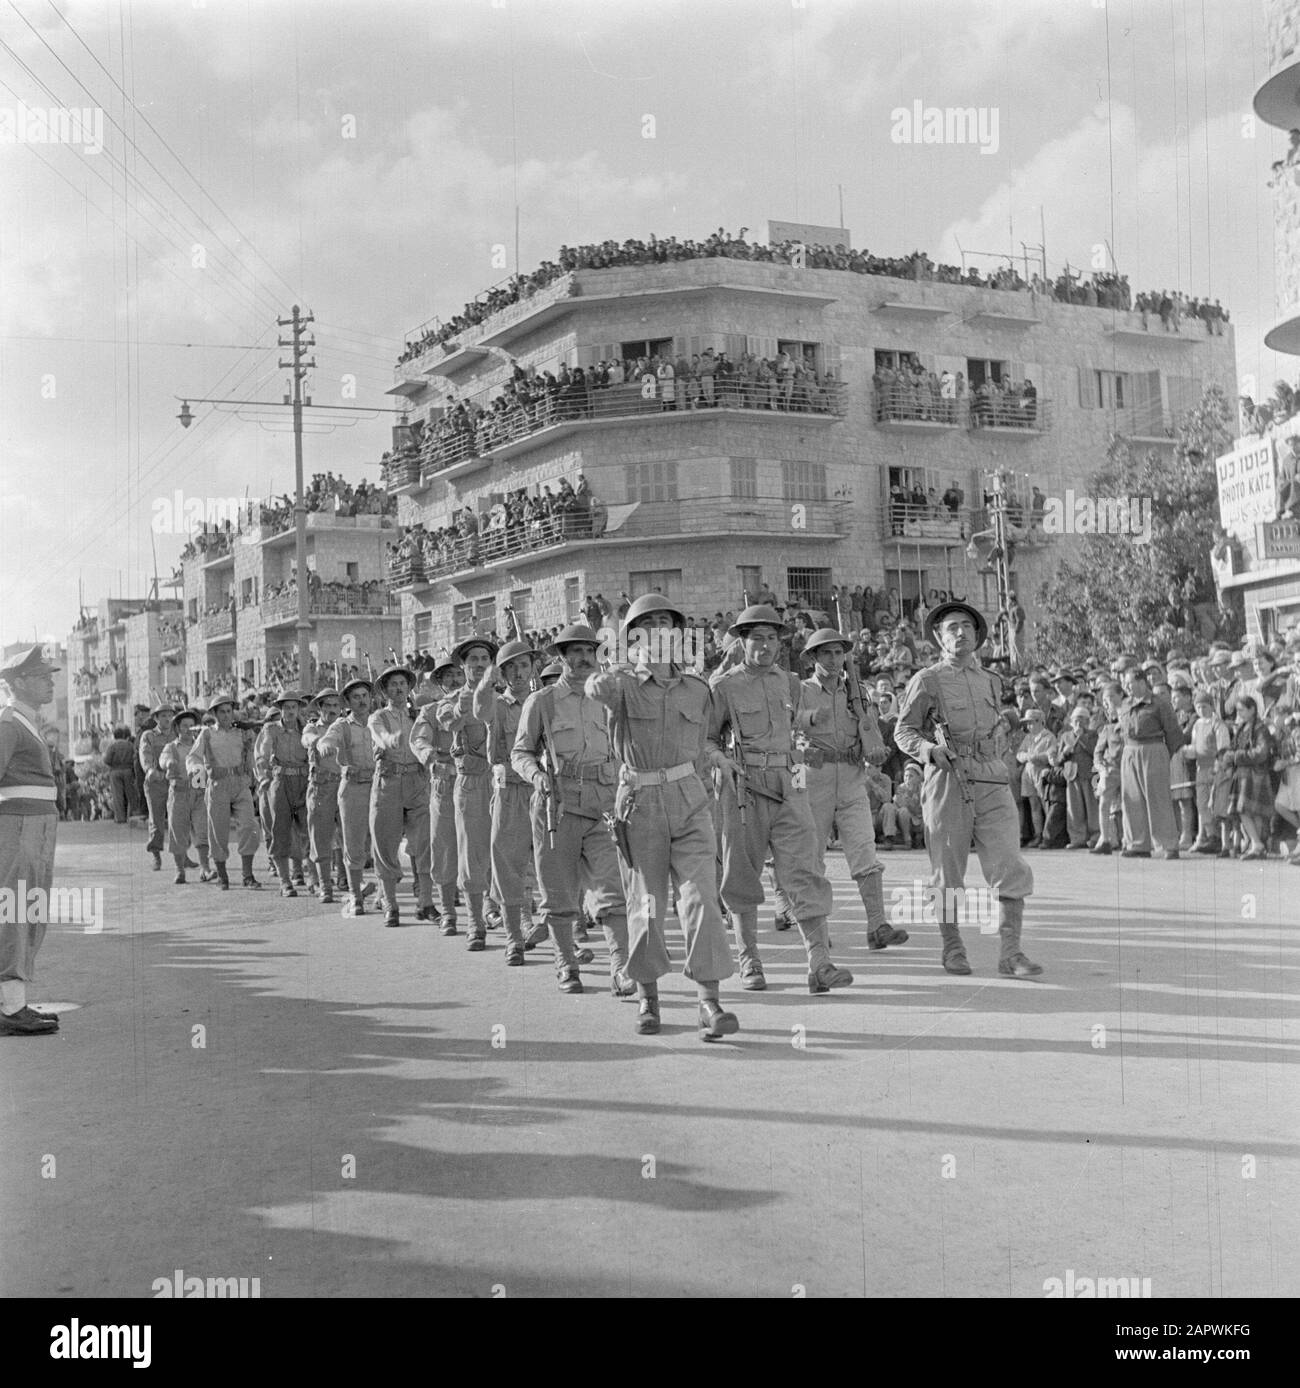 Israel 1948-1949: Haifa  Military unit during the military parade in Haifa on the occasion of the first anniversary of Israel's independence on May 15, 1949 Date: 1948 Location: Haifa, Israel Keywords: architecture, military parades, national holidays, public, uniforms, weapons Stock Photo